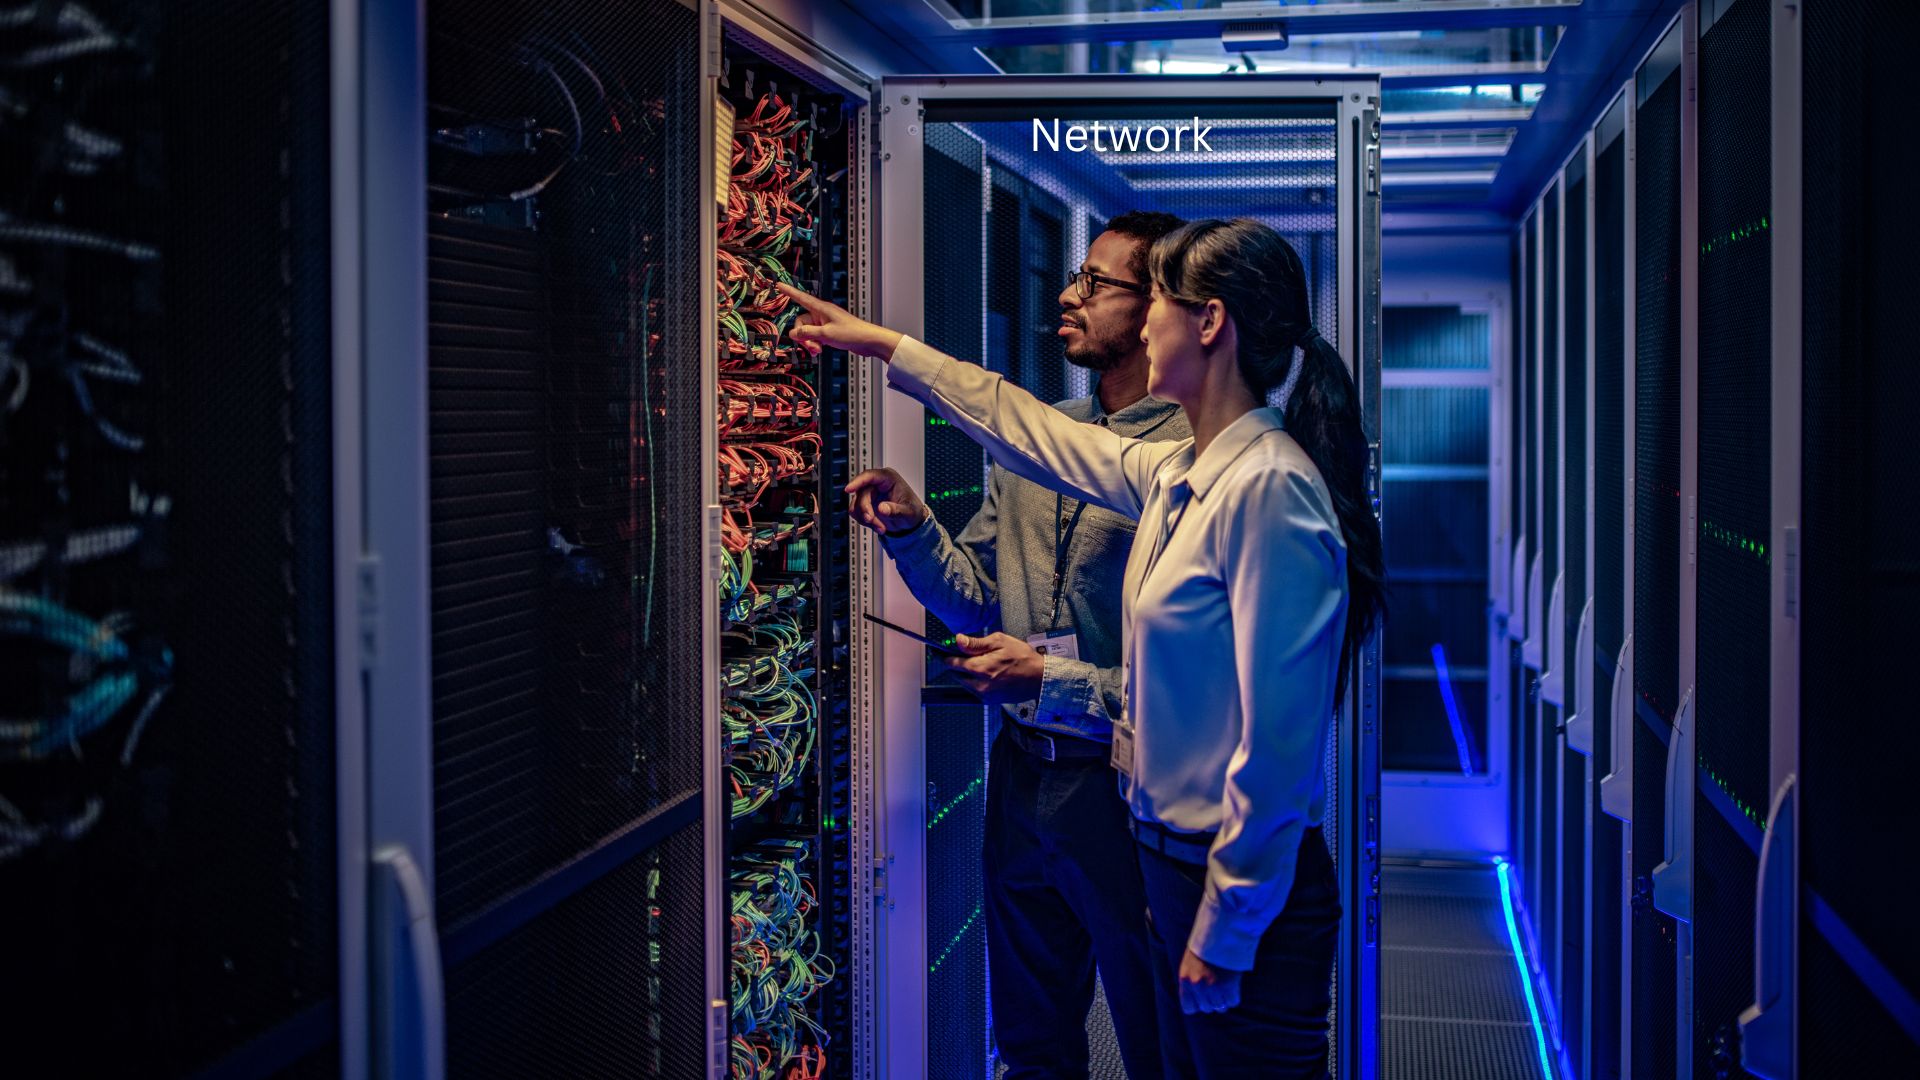 Two people inspecting server, network scanning operations security